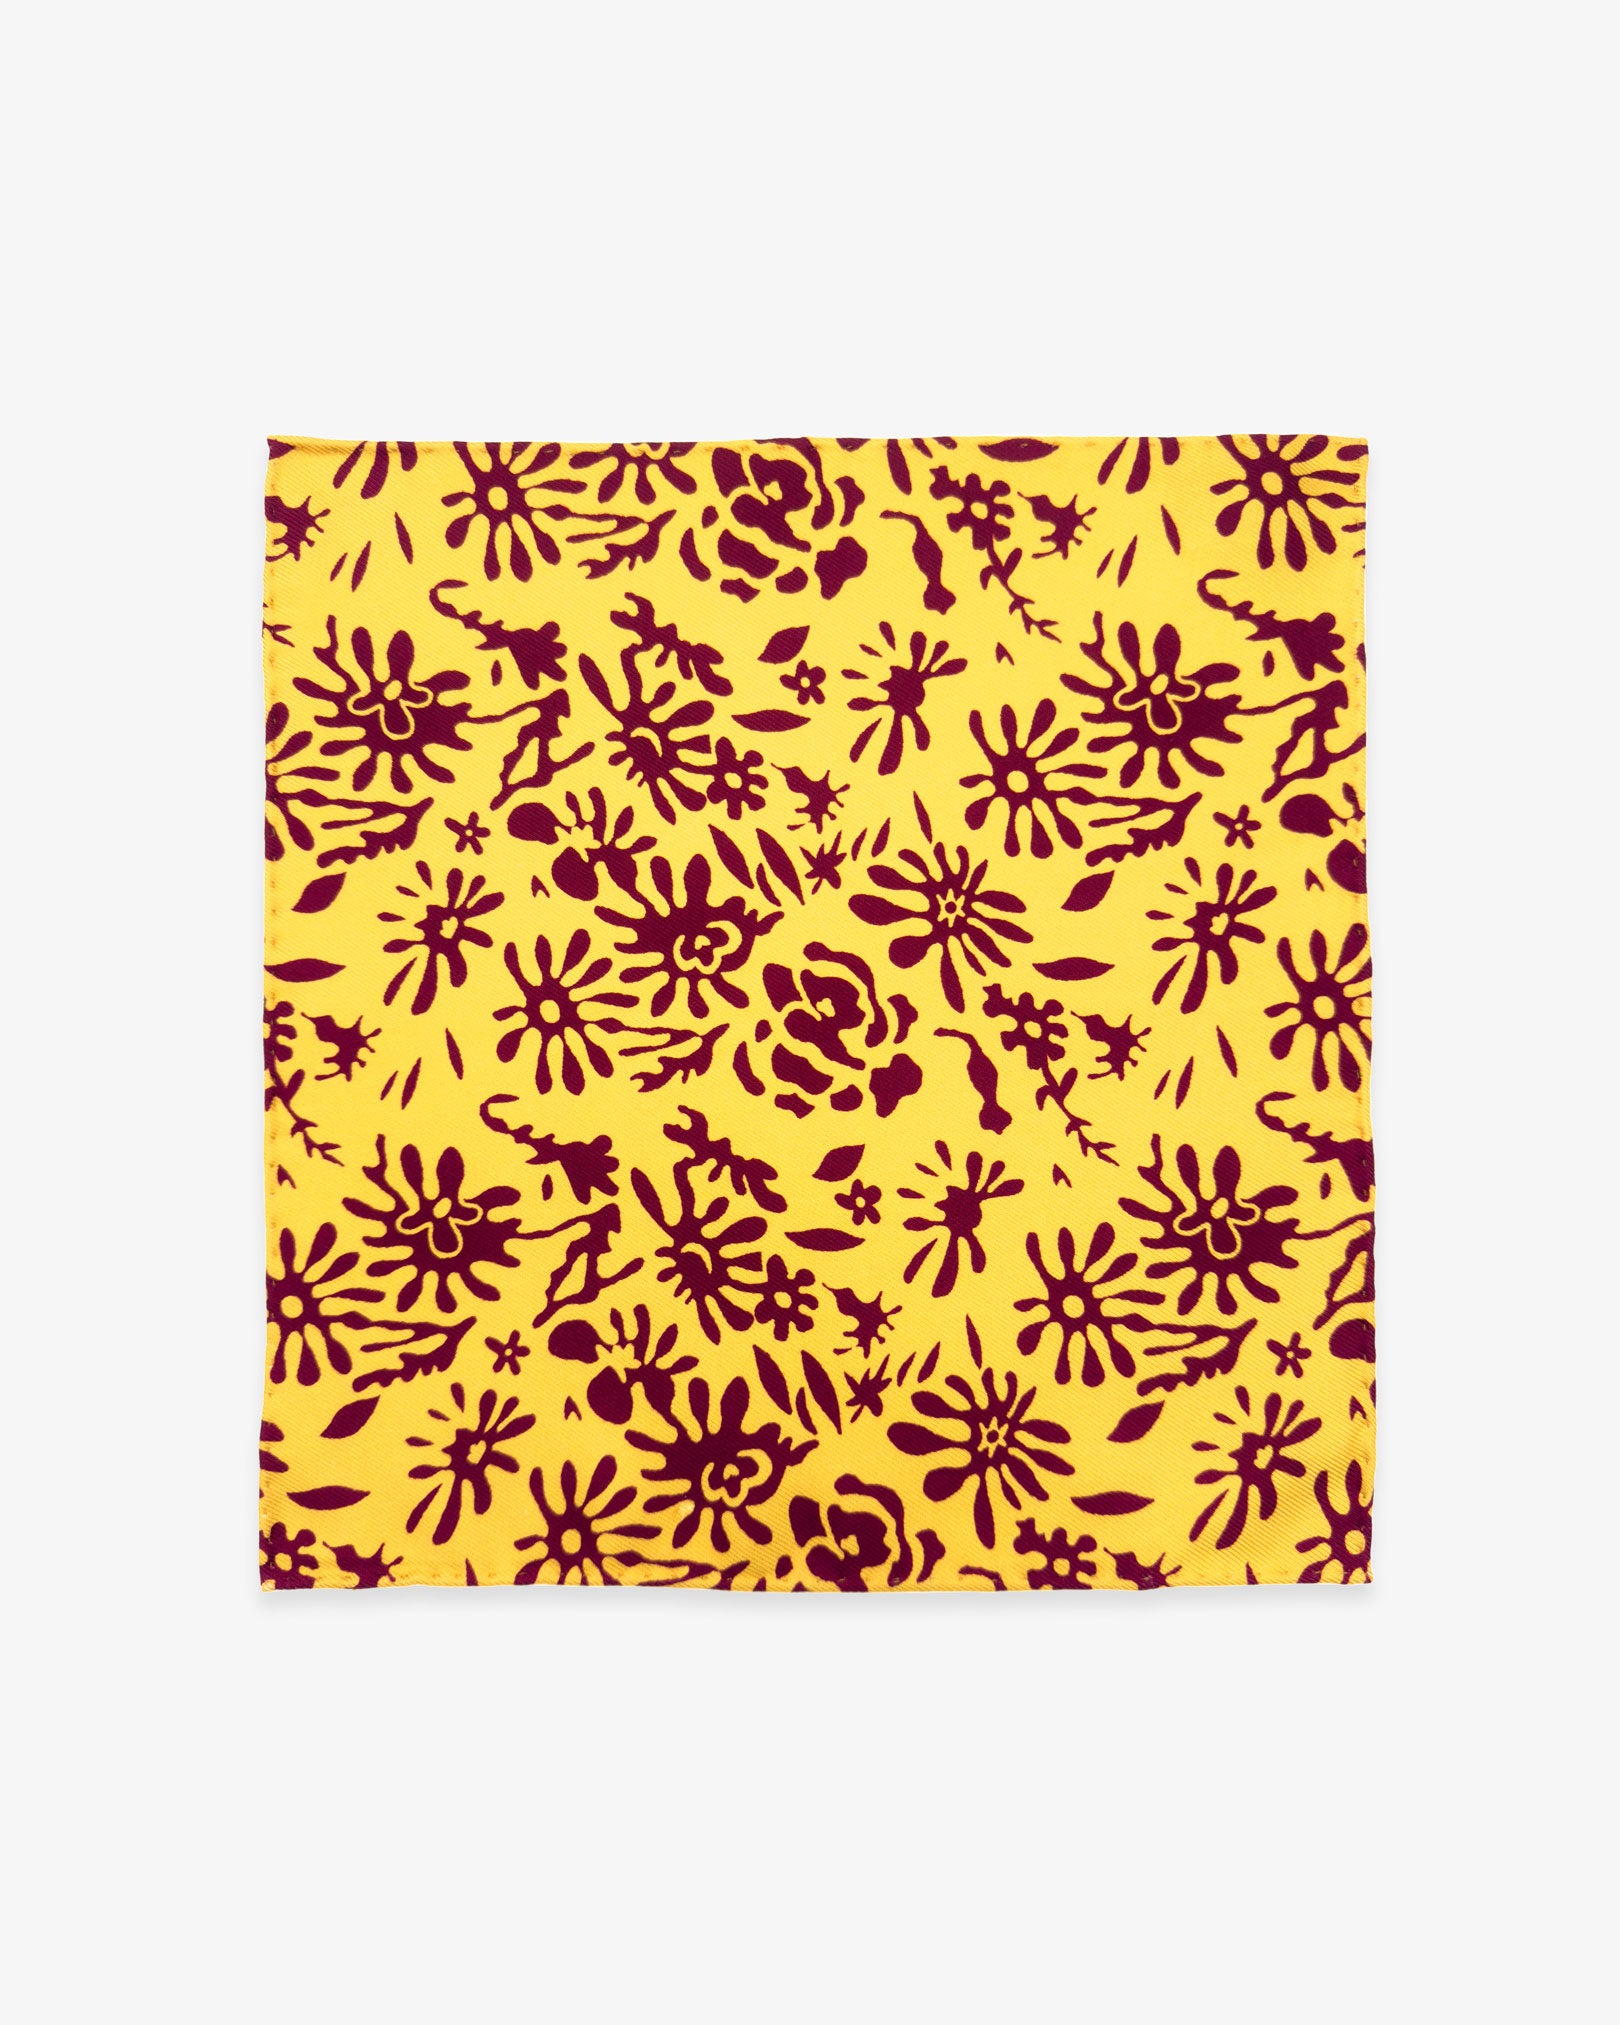 Fully unfolded 'Blenheim' English silk pocket square, showing the attractive organic decorative forms in maroon against a vibrant yellow background.